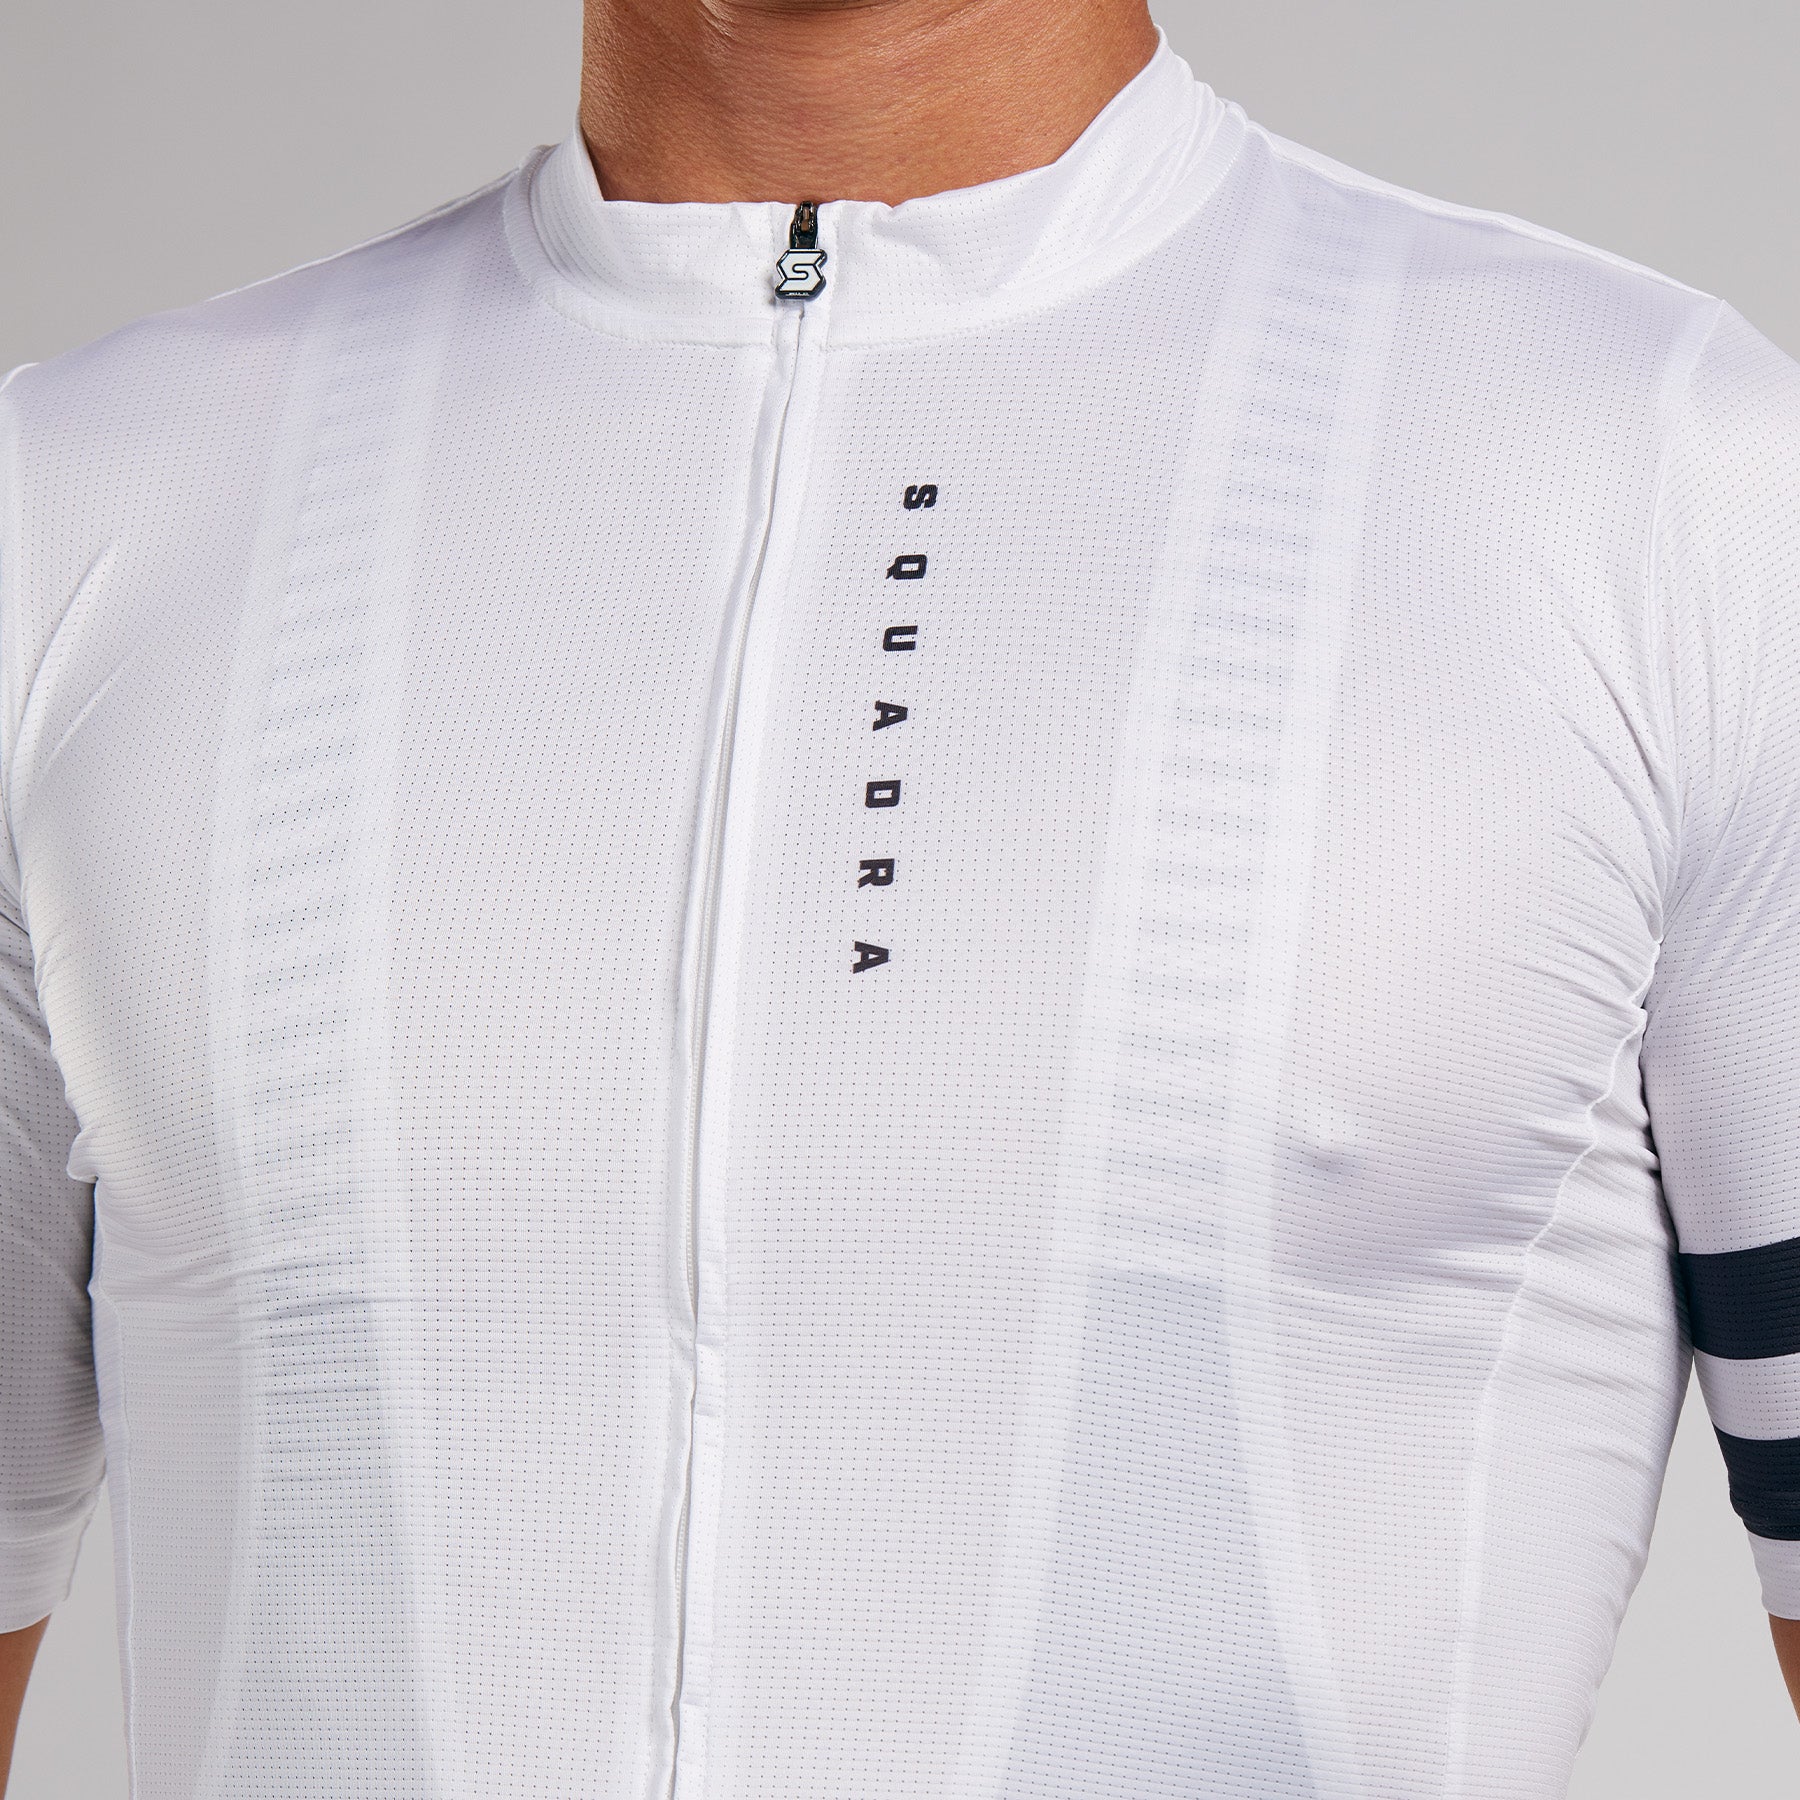 Cycle Jersey